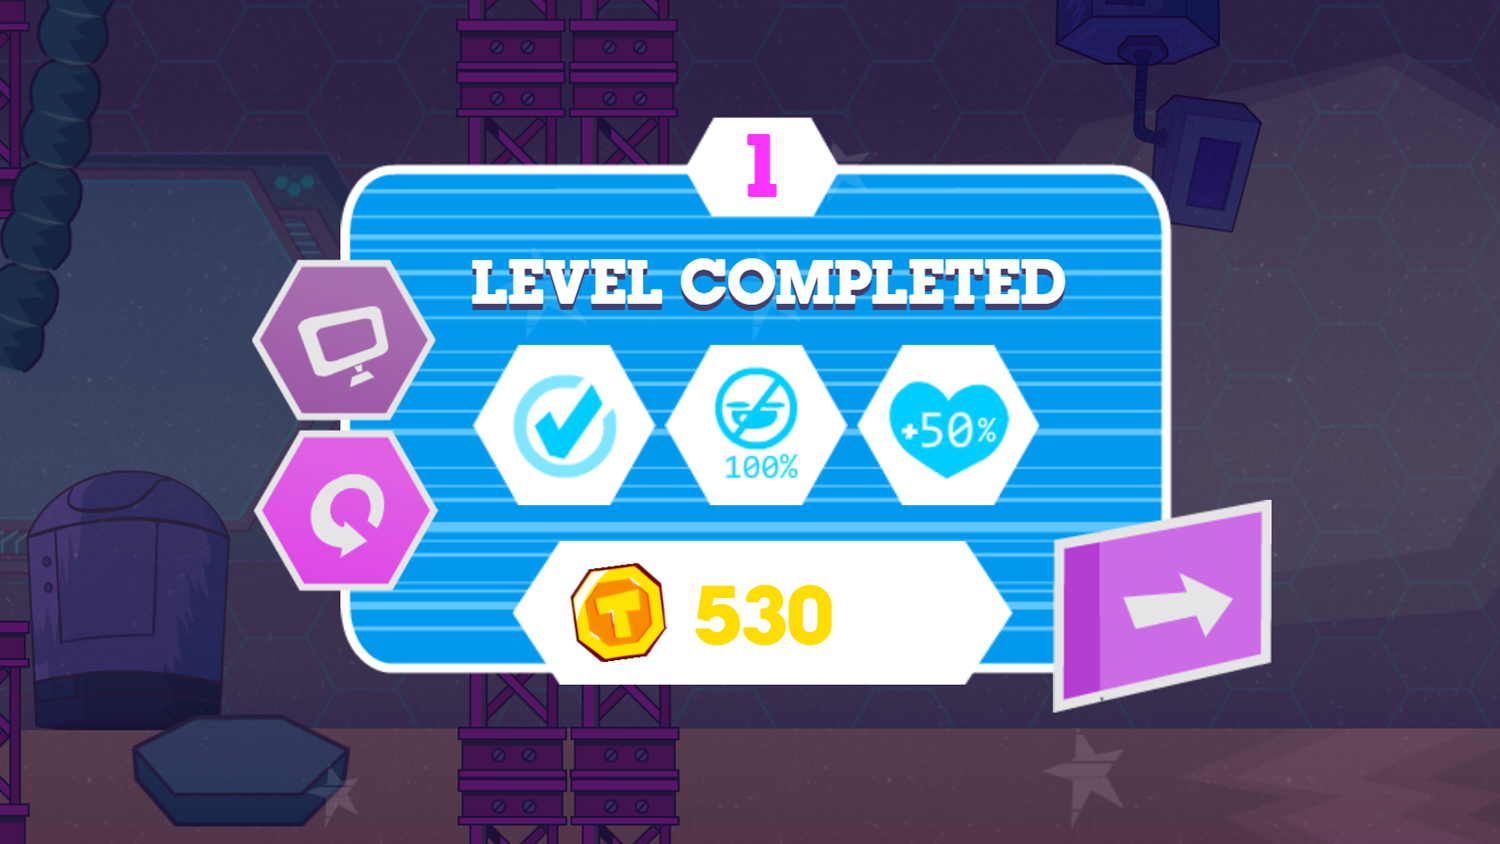 Teen Titans Go Attack of the Drones Game Level Completed Screenshot.